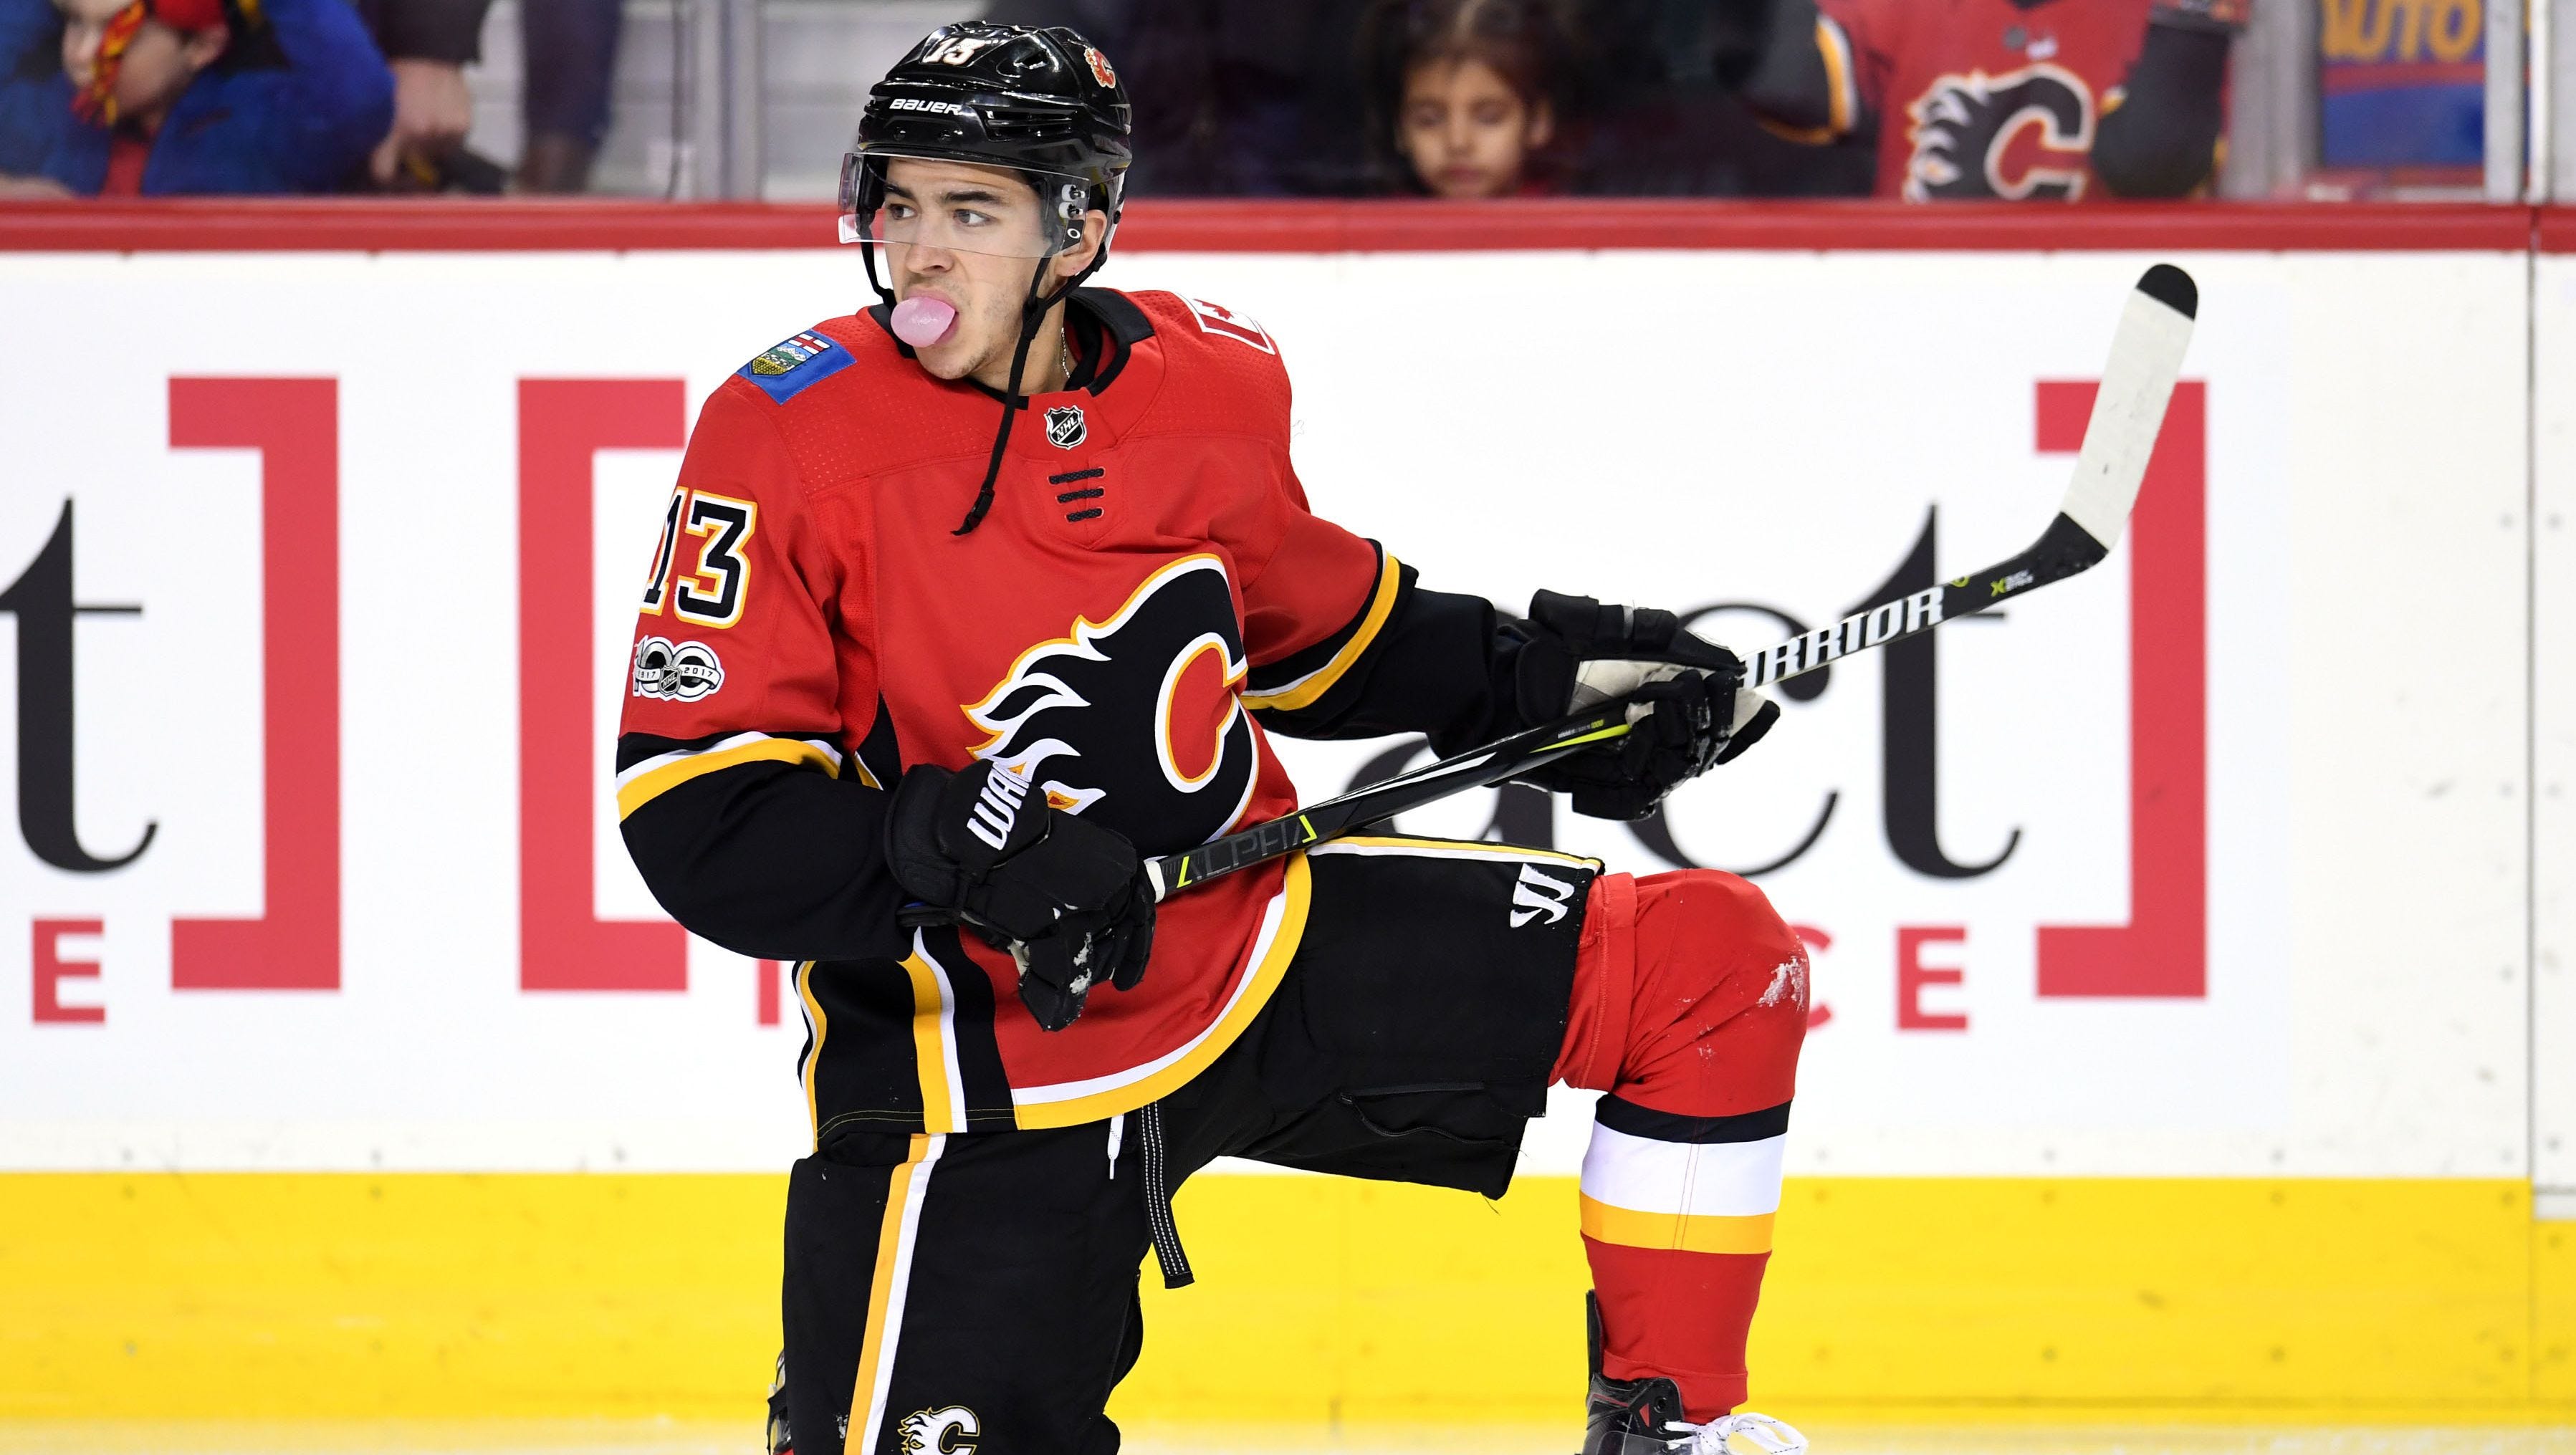 Flames star Johnny Gaudreau, a native of South Jersey, could be an